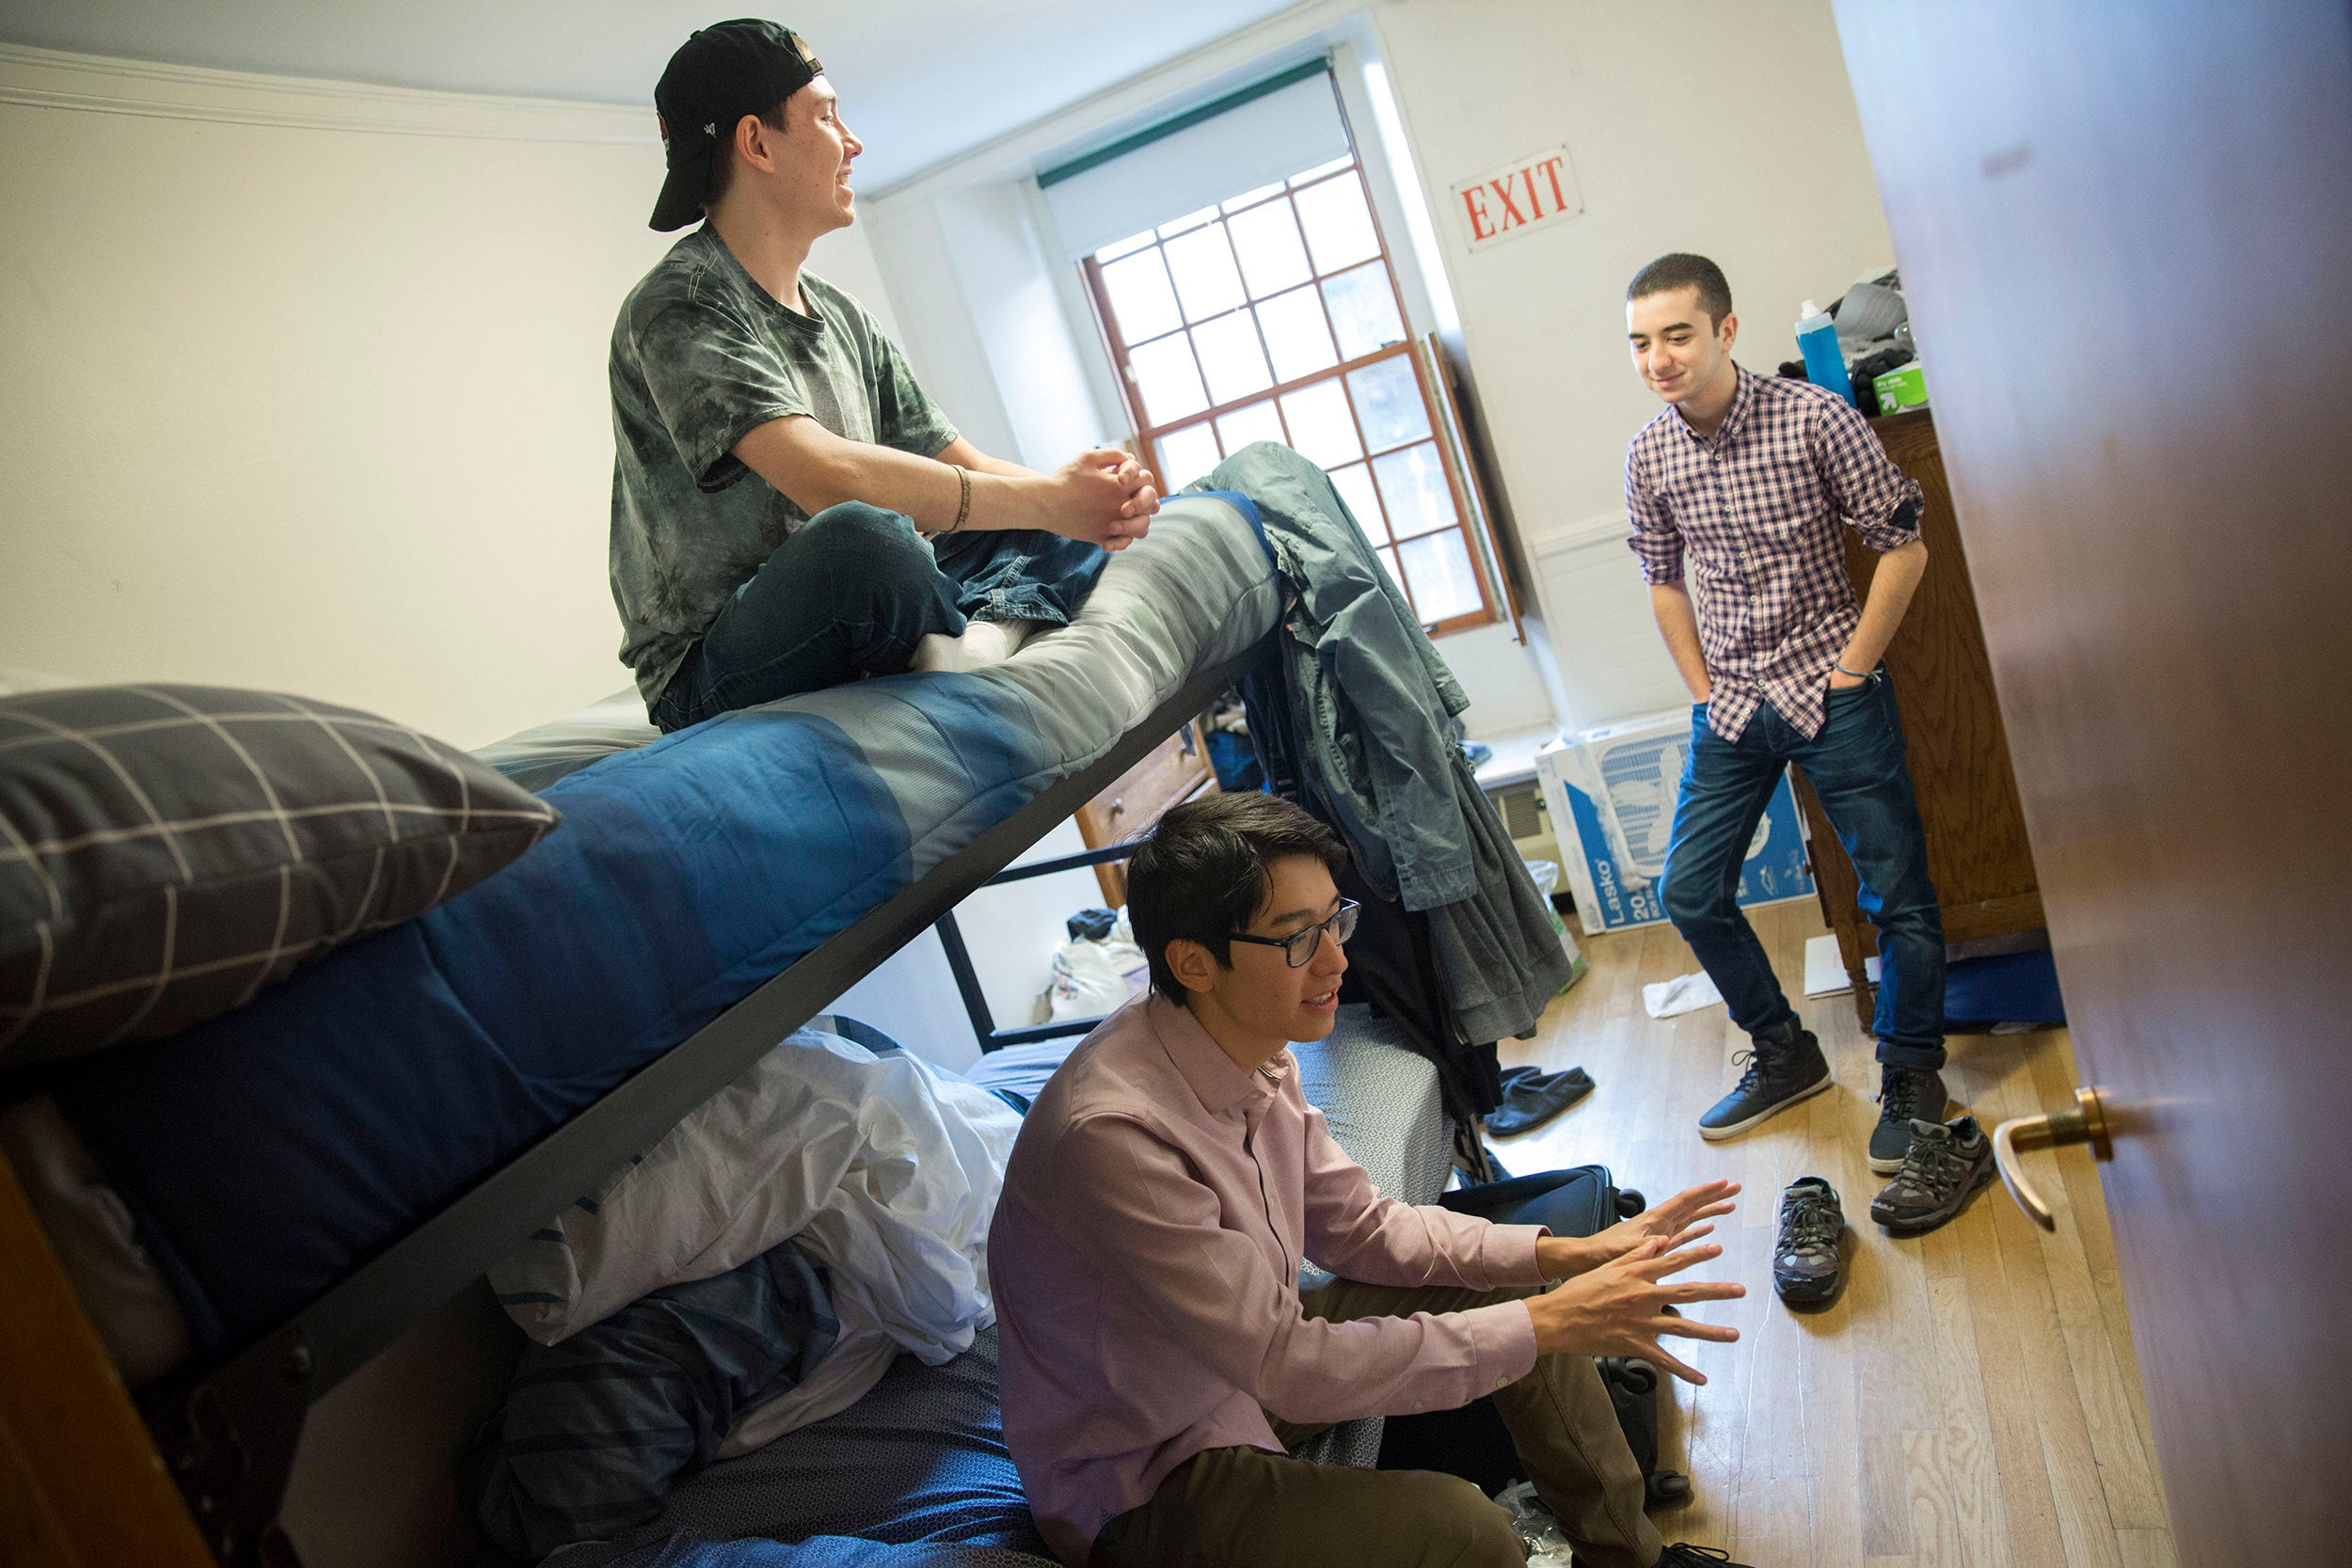 Roommates, Clifford "Scotty" Courvoisier, (from upper left to right) Kenneth Shinozuka, and Abdelrhman "Abdul" Saleh, (from Egypt), All class of '20 live in Thayer House together.